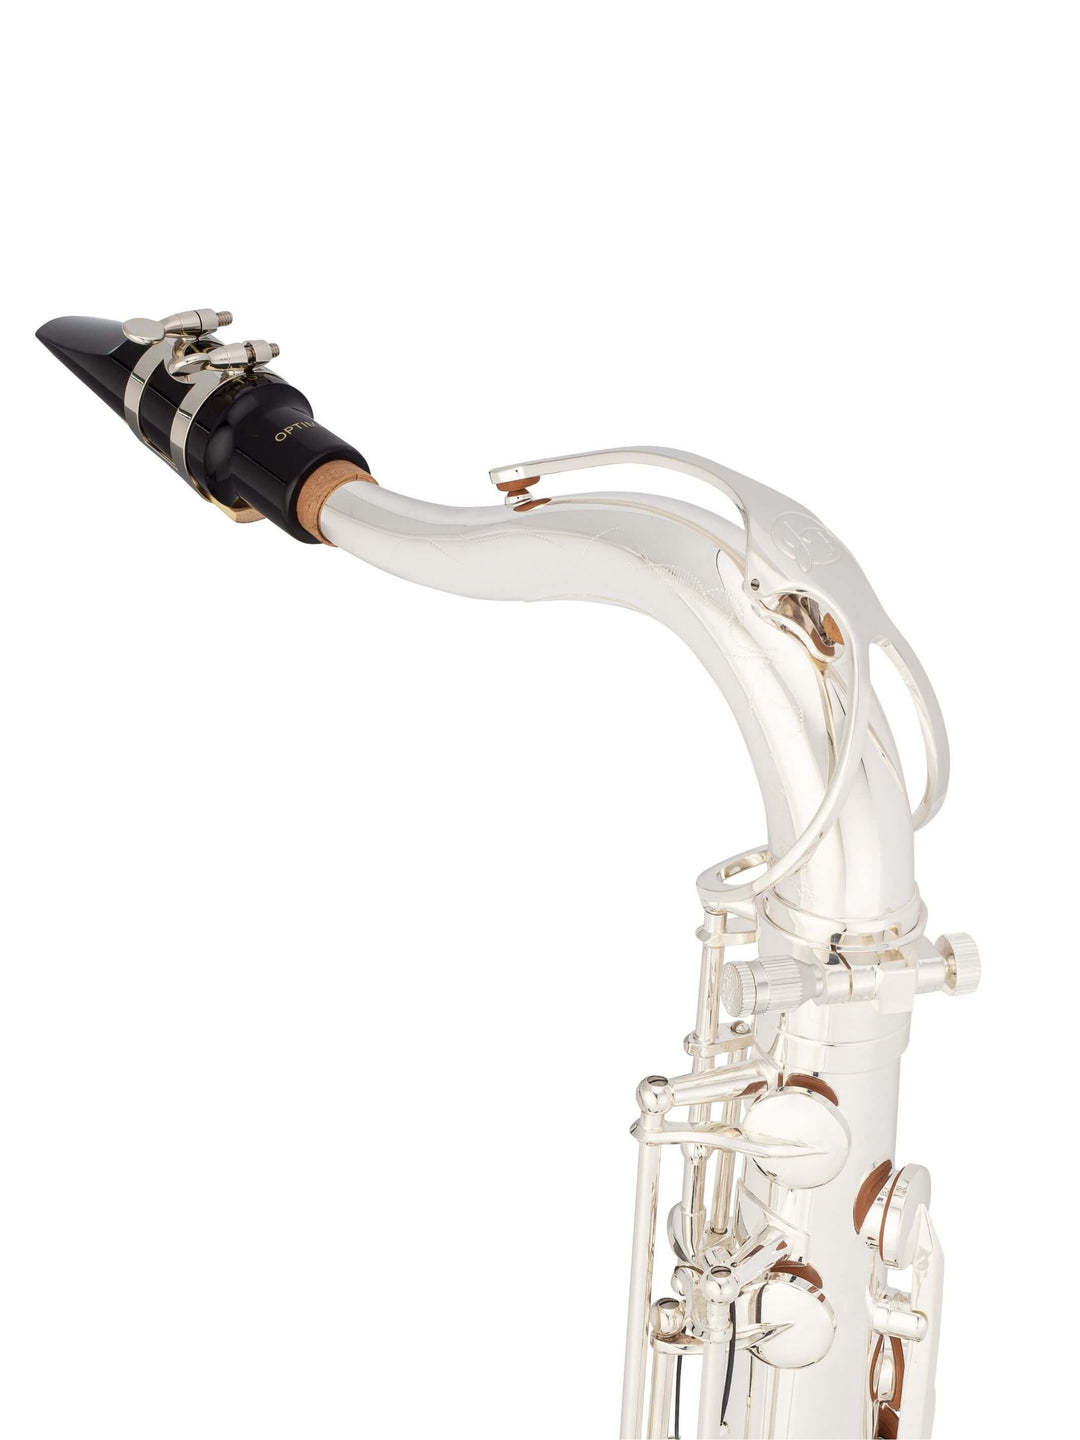 TS-860S Tenor Saxophone Silver-Plated Neck with Mouthpiece#finish_silver